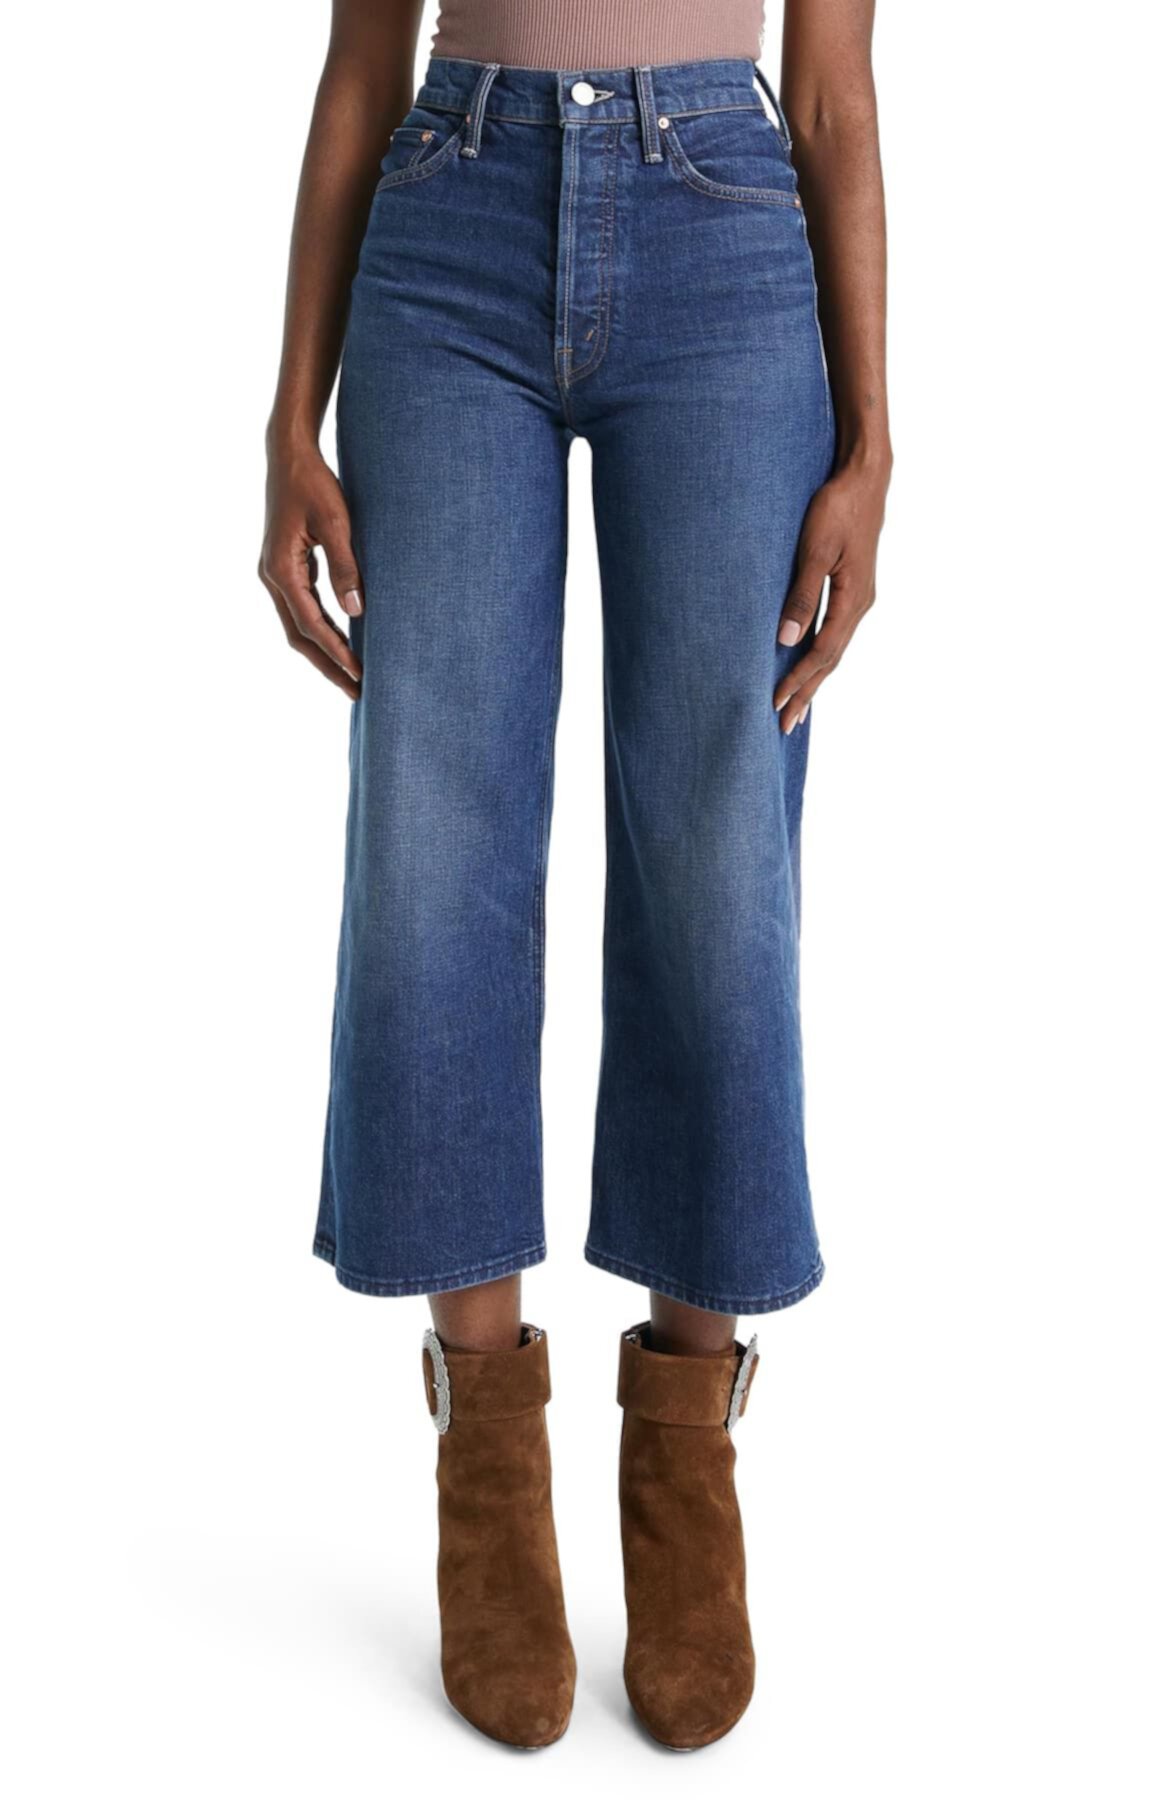 The Tomcat Roller Shorty High Waist Crop Flare Jeans MOTHER